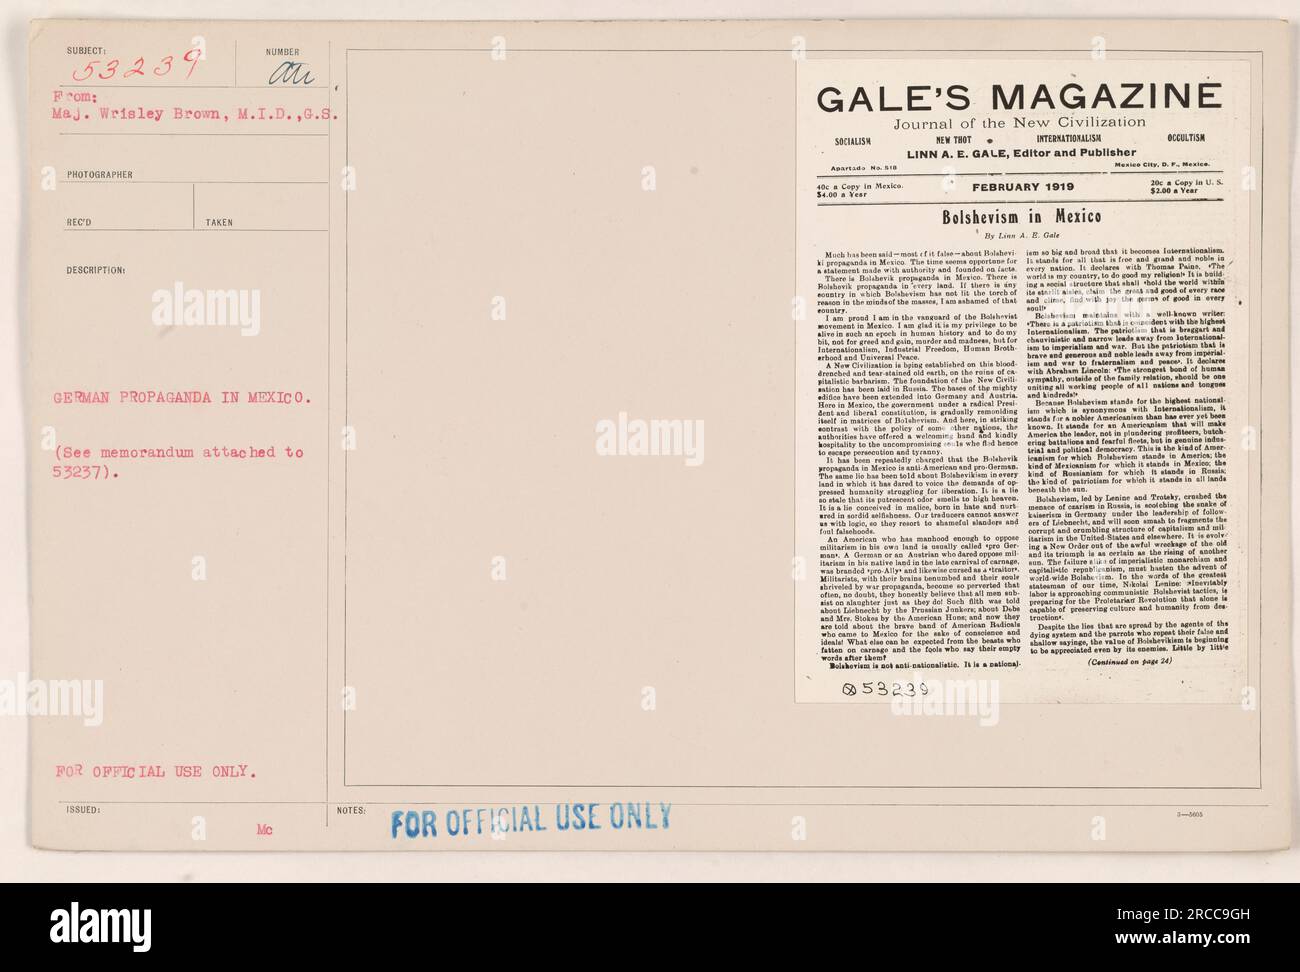 'German propaganda in Mexico. This image shows a newspaper titled ‘Gale’s Magazine’ with an article discussing Bolshevism in Mexico. The article claims that socialism and communism are gaining traction in Mexico and warns against their spread. This propaganda aimed to discredit and undermine the Mexican government and promote German interests during World War One.' Stock Photo